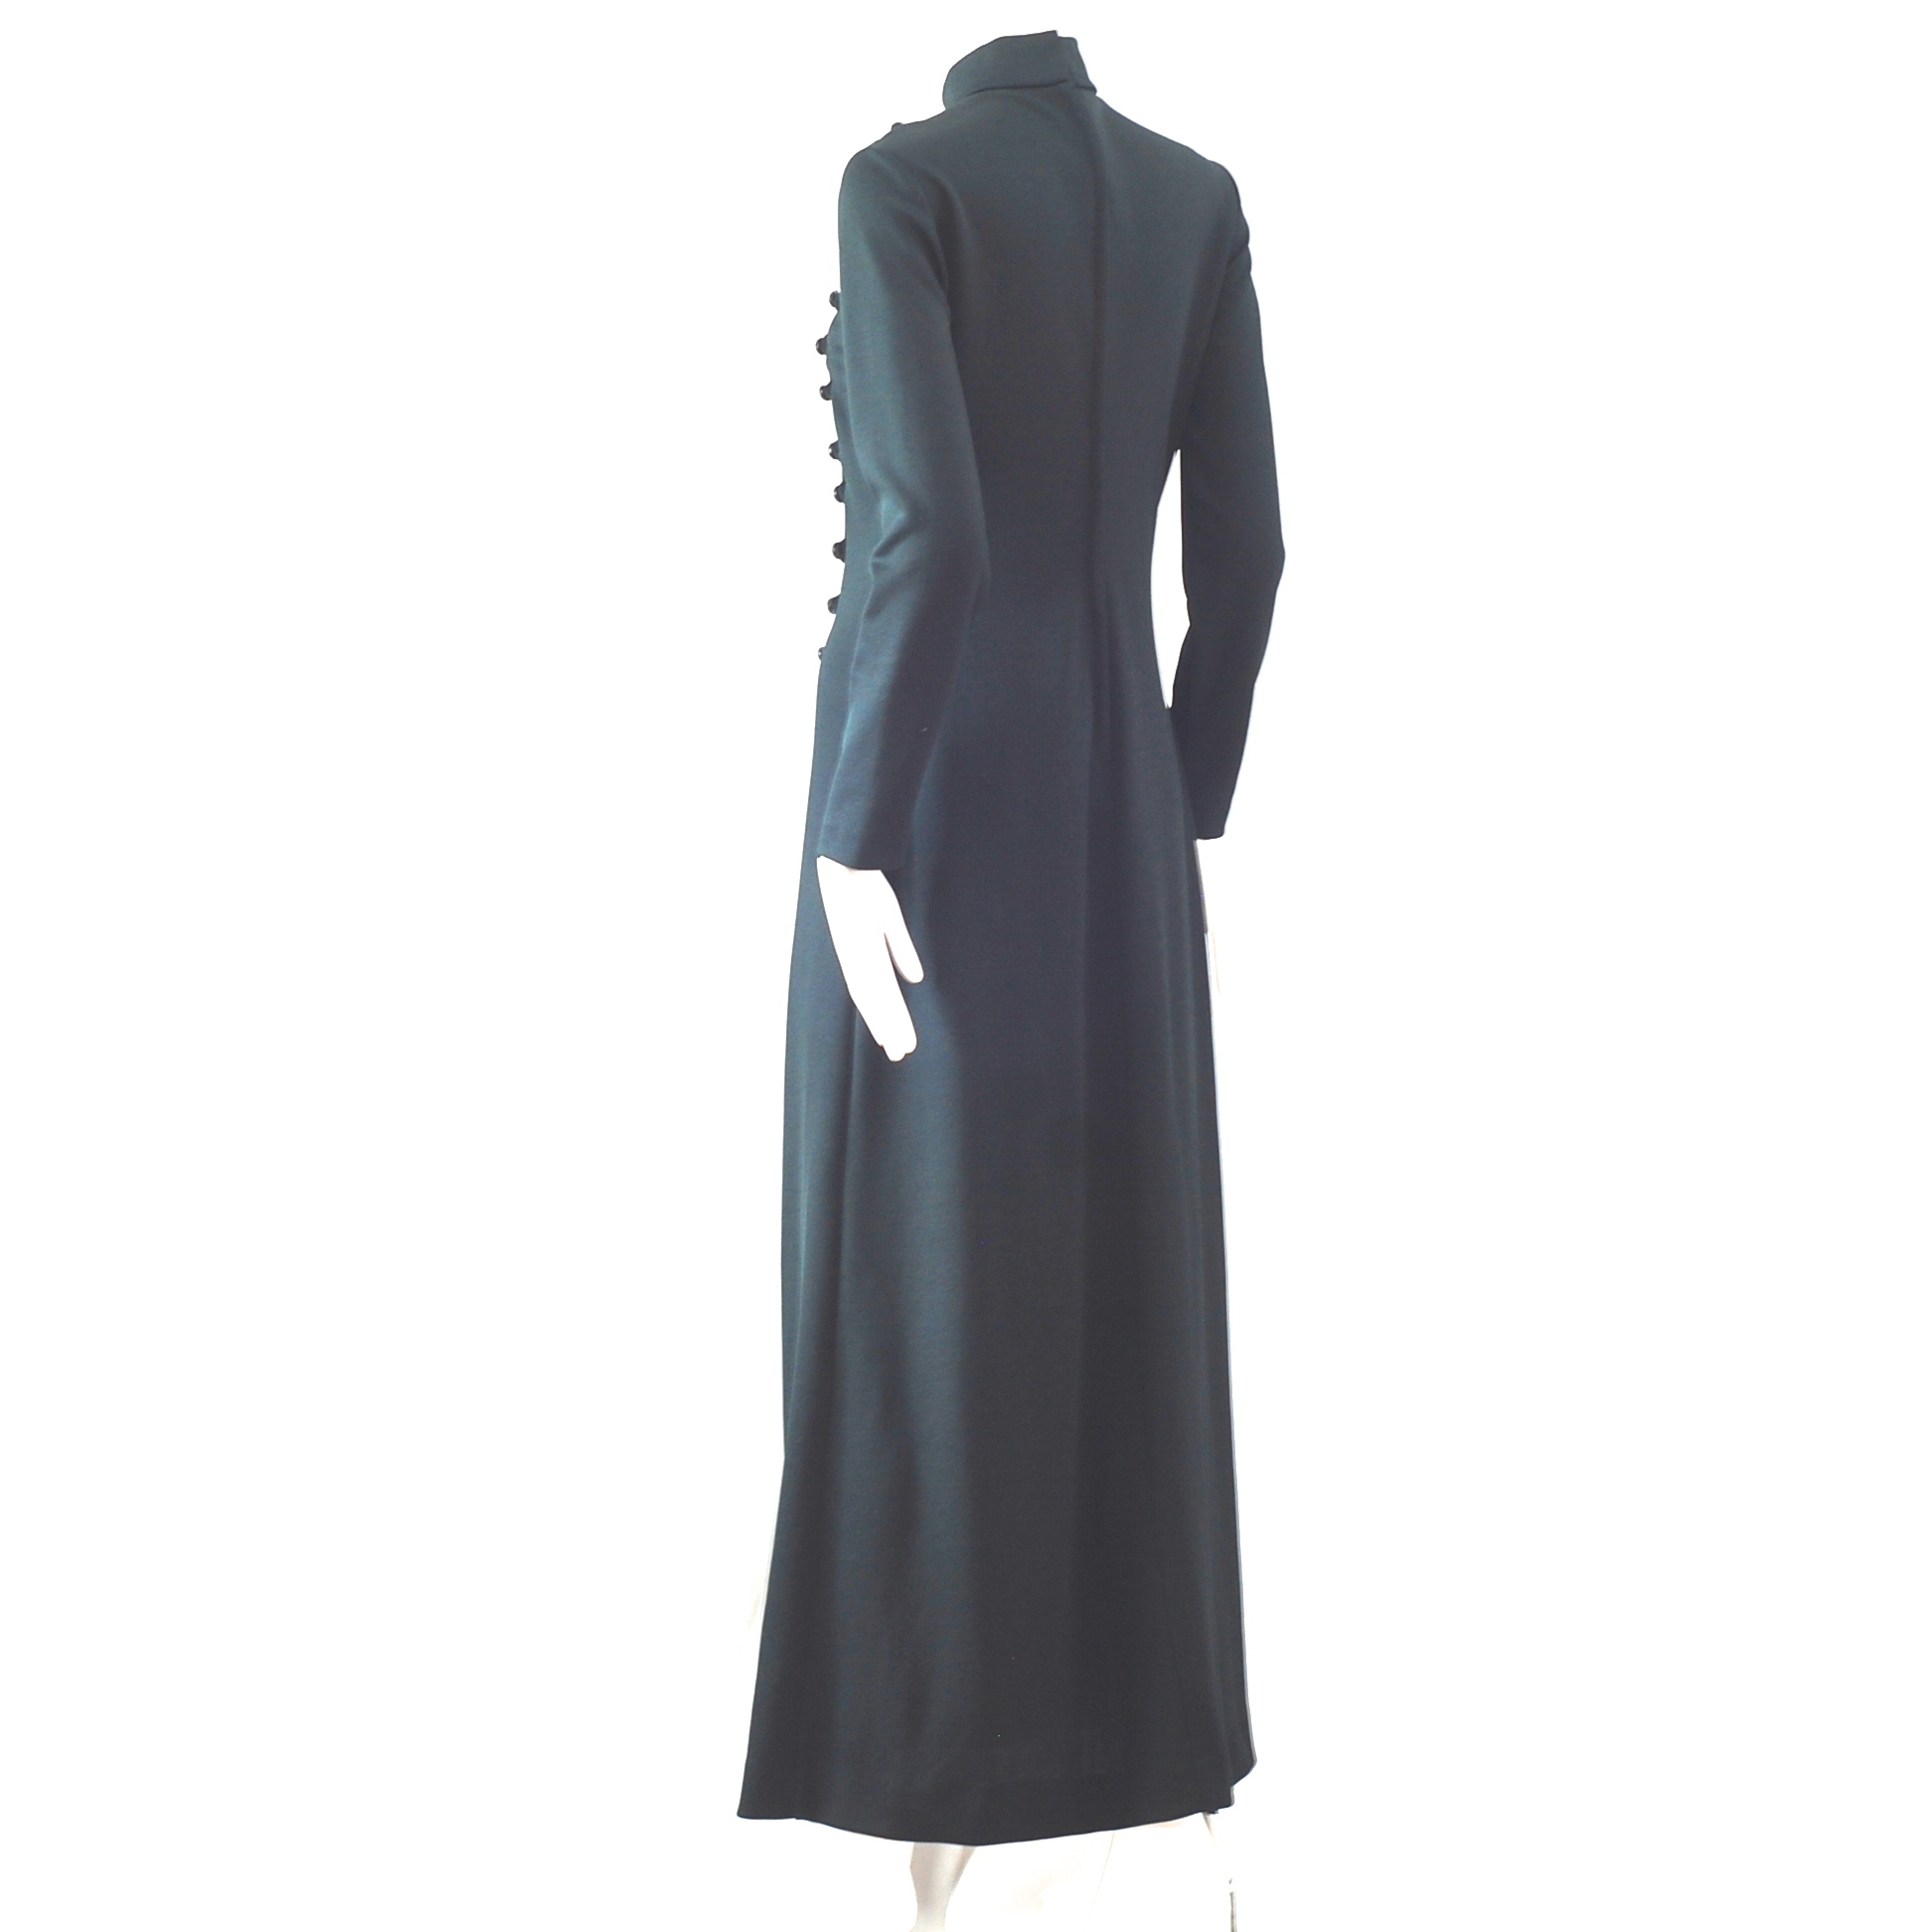 Jonathan Logan 1970’s Classy Black Maxi Dress With Button Accents ...